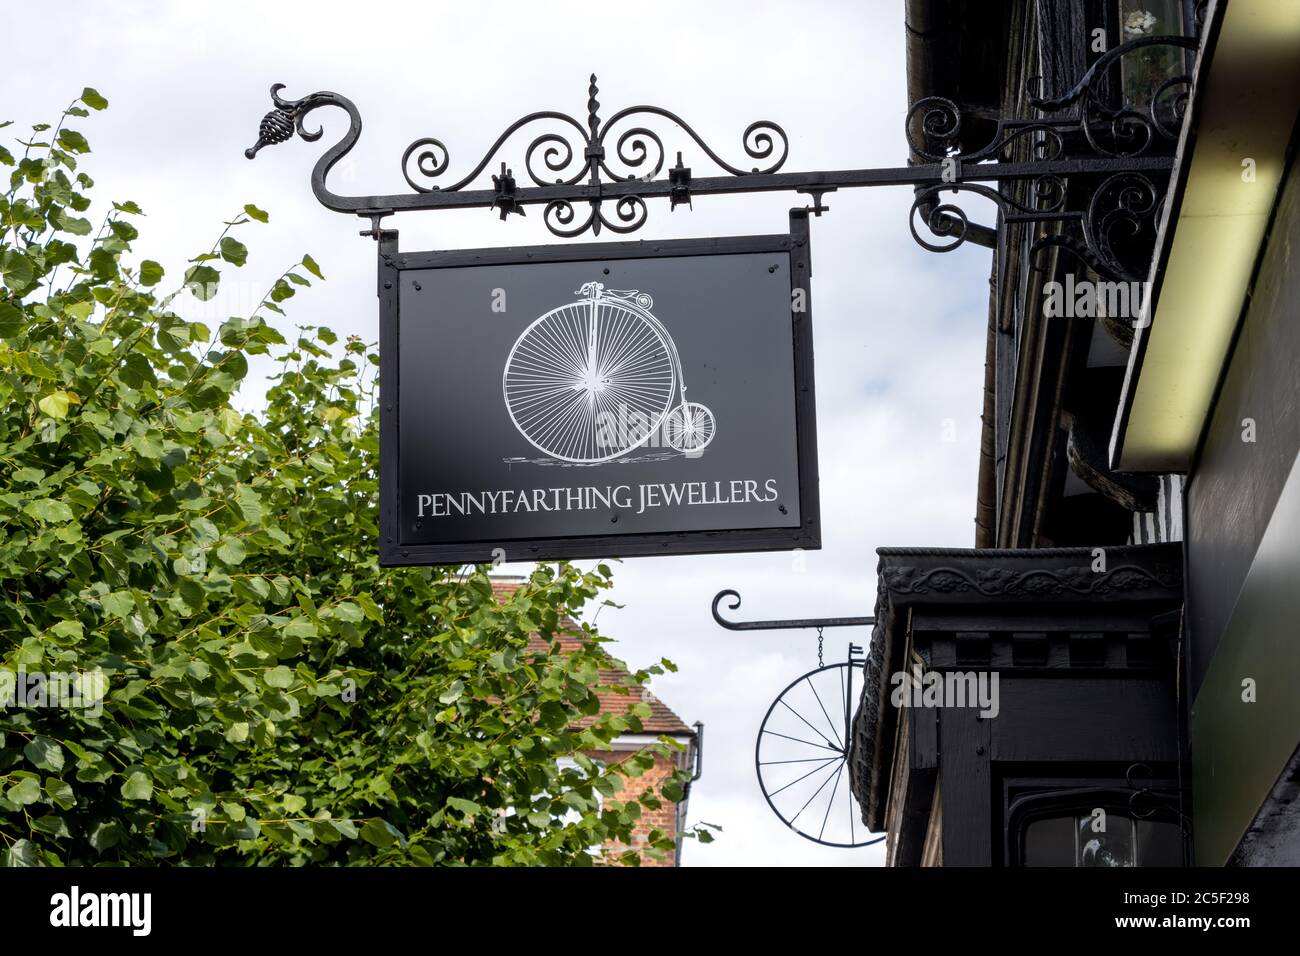 EAST GRINSTEAD, WEST SUSSEX/UK - 1 LUGLIO : segnale di Hanging per i gioiellieri di Penny Farthing a East Grinstead West Sussex il 1 luglio 2020 Foto Stock